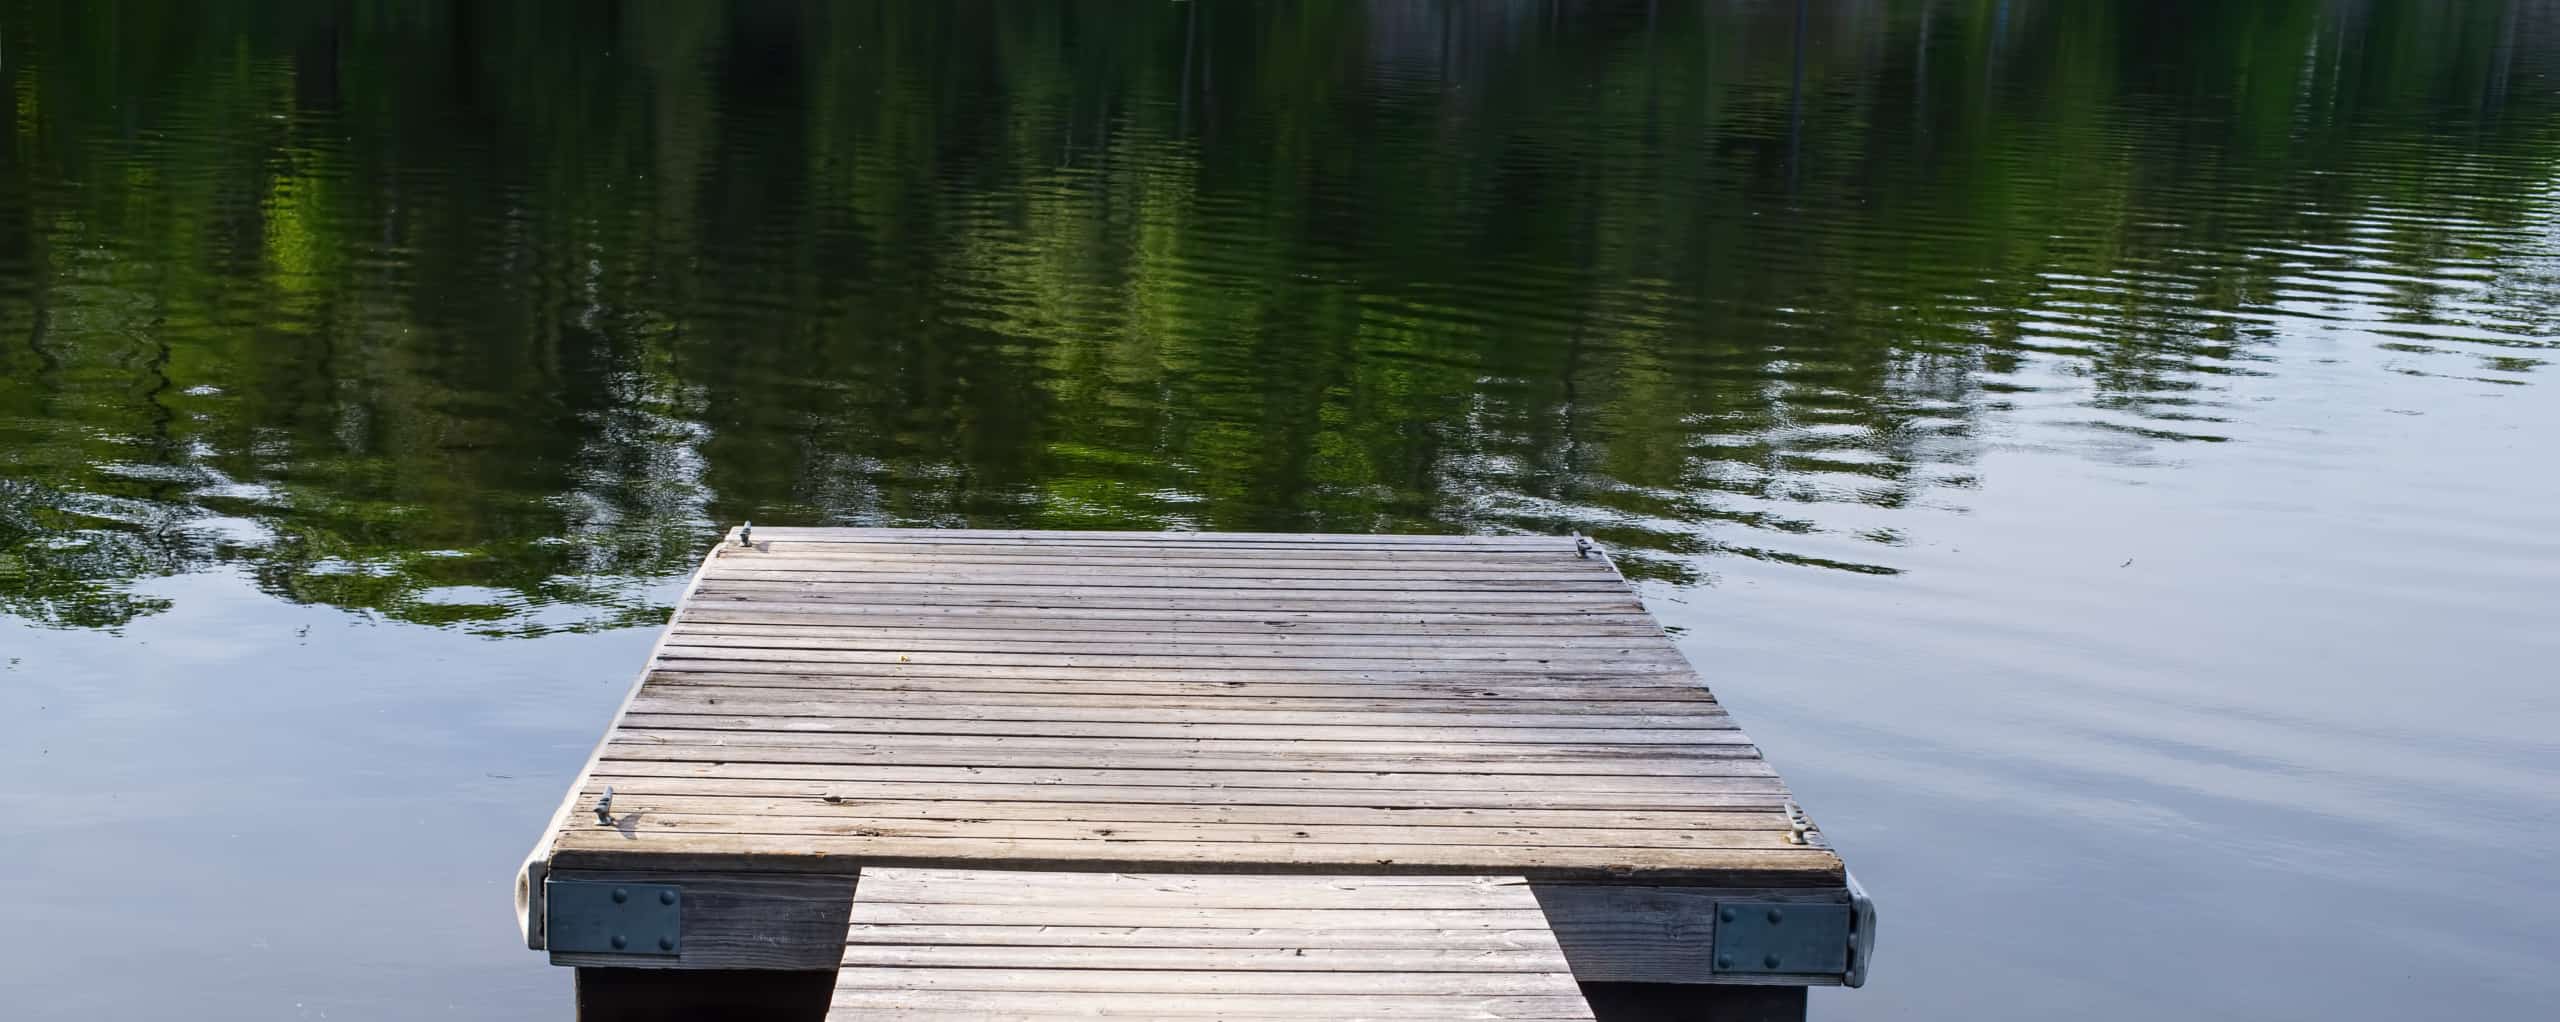 What Are Floating Docks?, What Are Floating Docks and How Do They Work? Learn below.